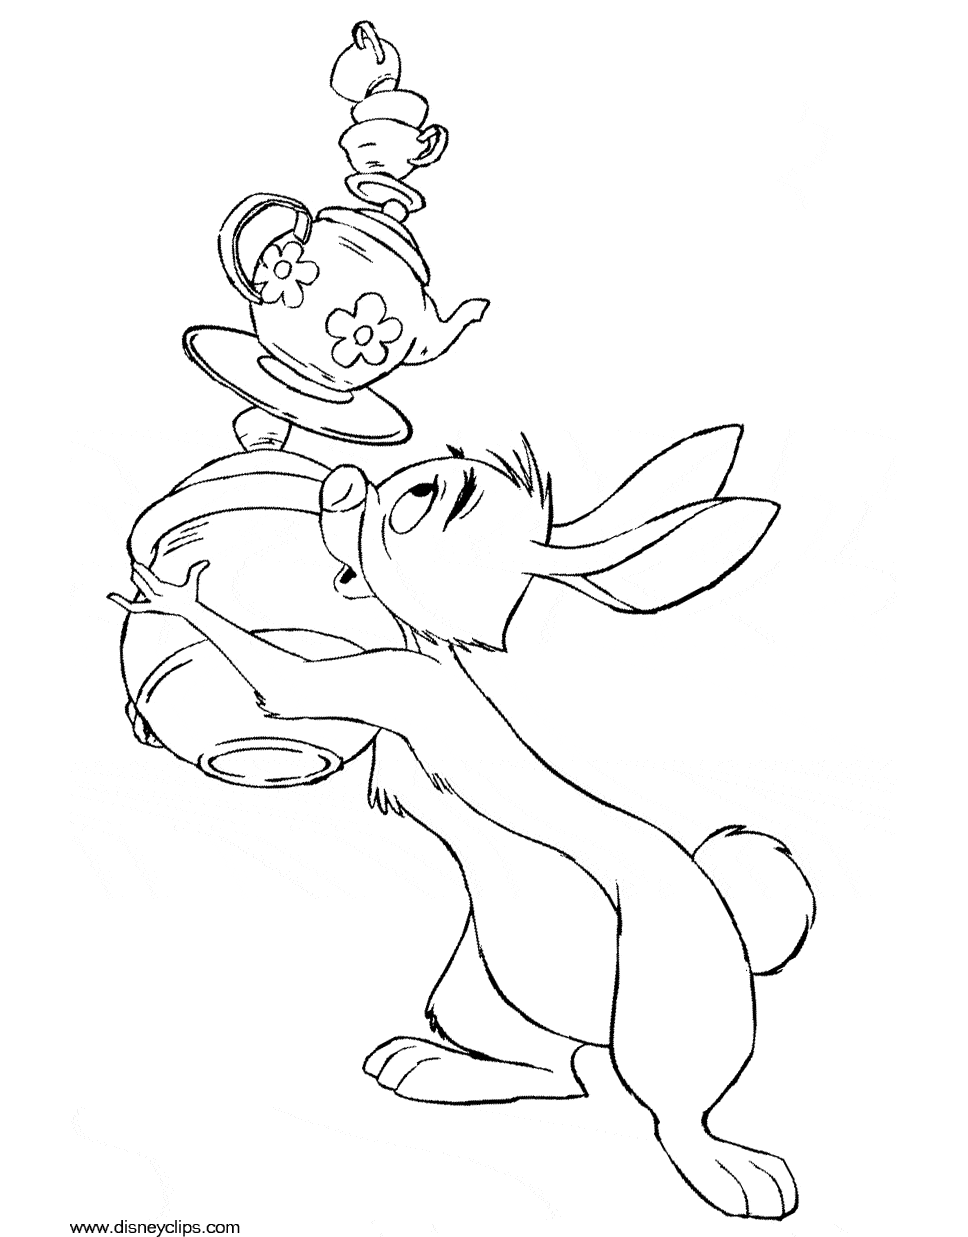 Winnie the Pooh & Friends Printable Coloring Pages 2 | Disney ...